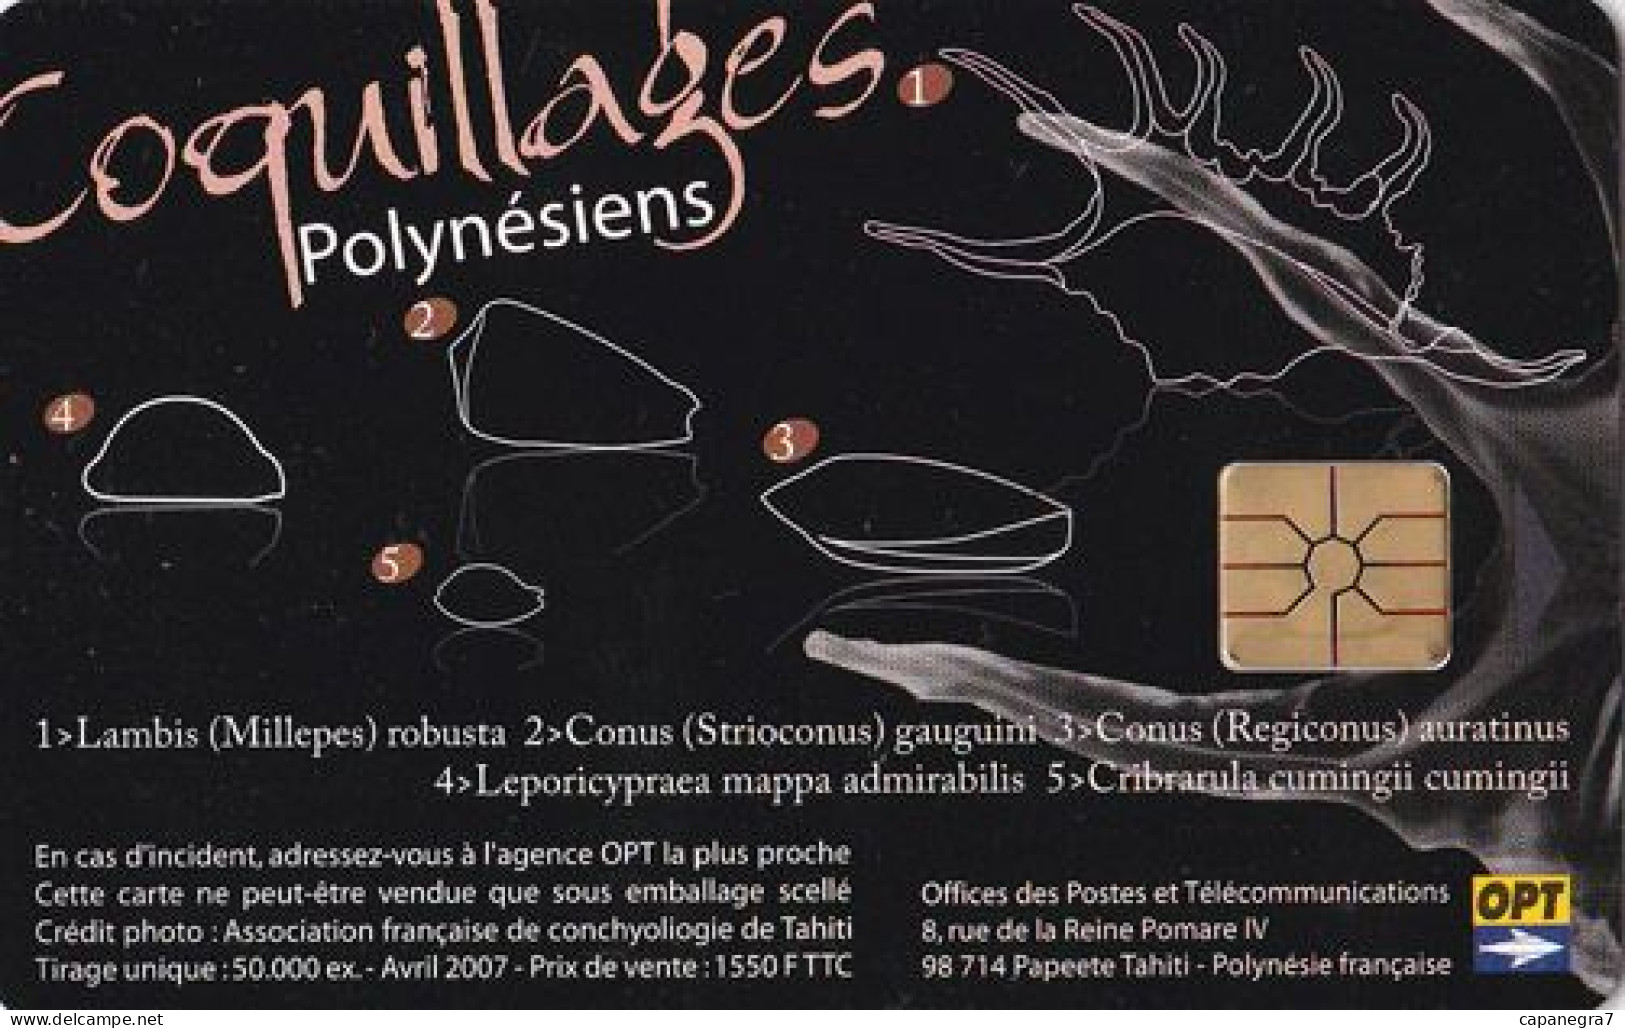 Coquillages Polynésiens, FP159,  French Polynesia - Frans-Polynesië